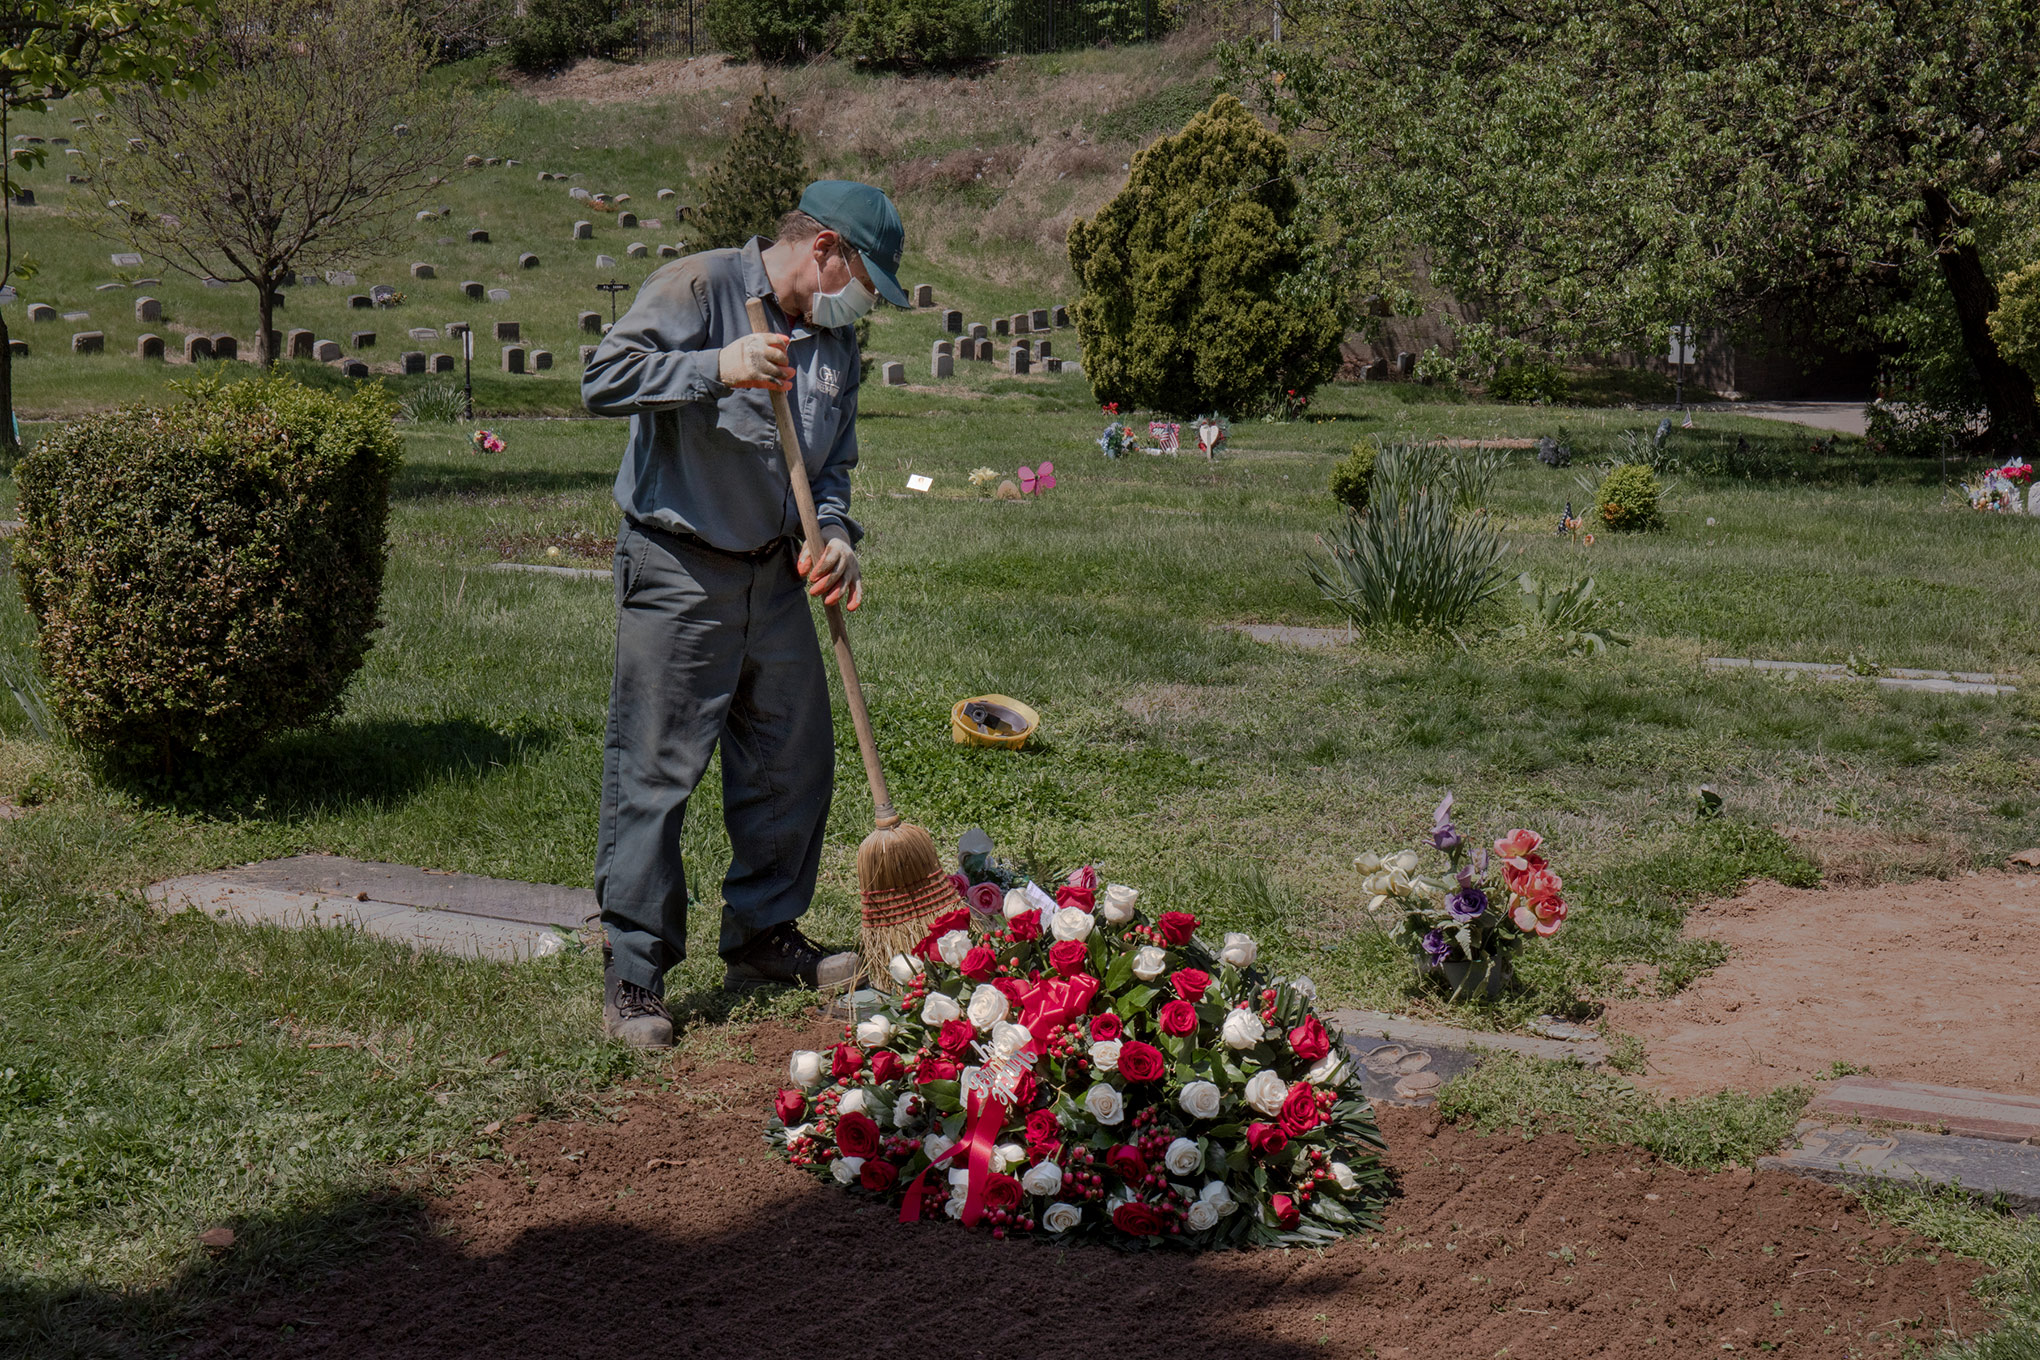 Janusz Karkos tends the grave of a COVID-19 victim at Brooklyn's Green-Wood Cemetary on May 4. As of Sept. 21, the U.S. coronavirus death toll surpassed 200,000